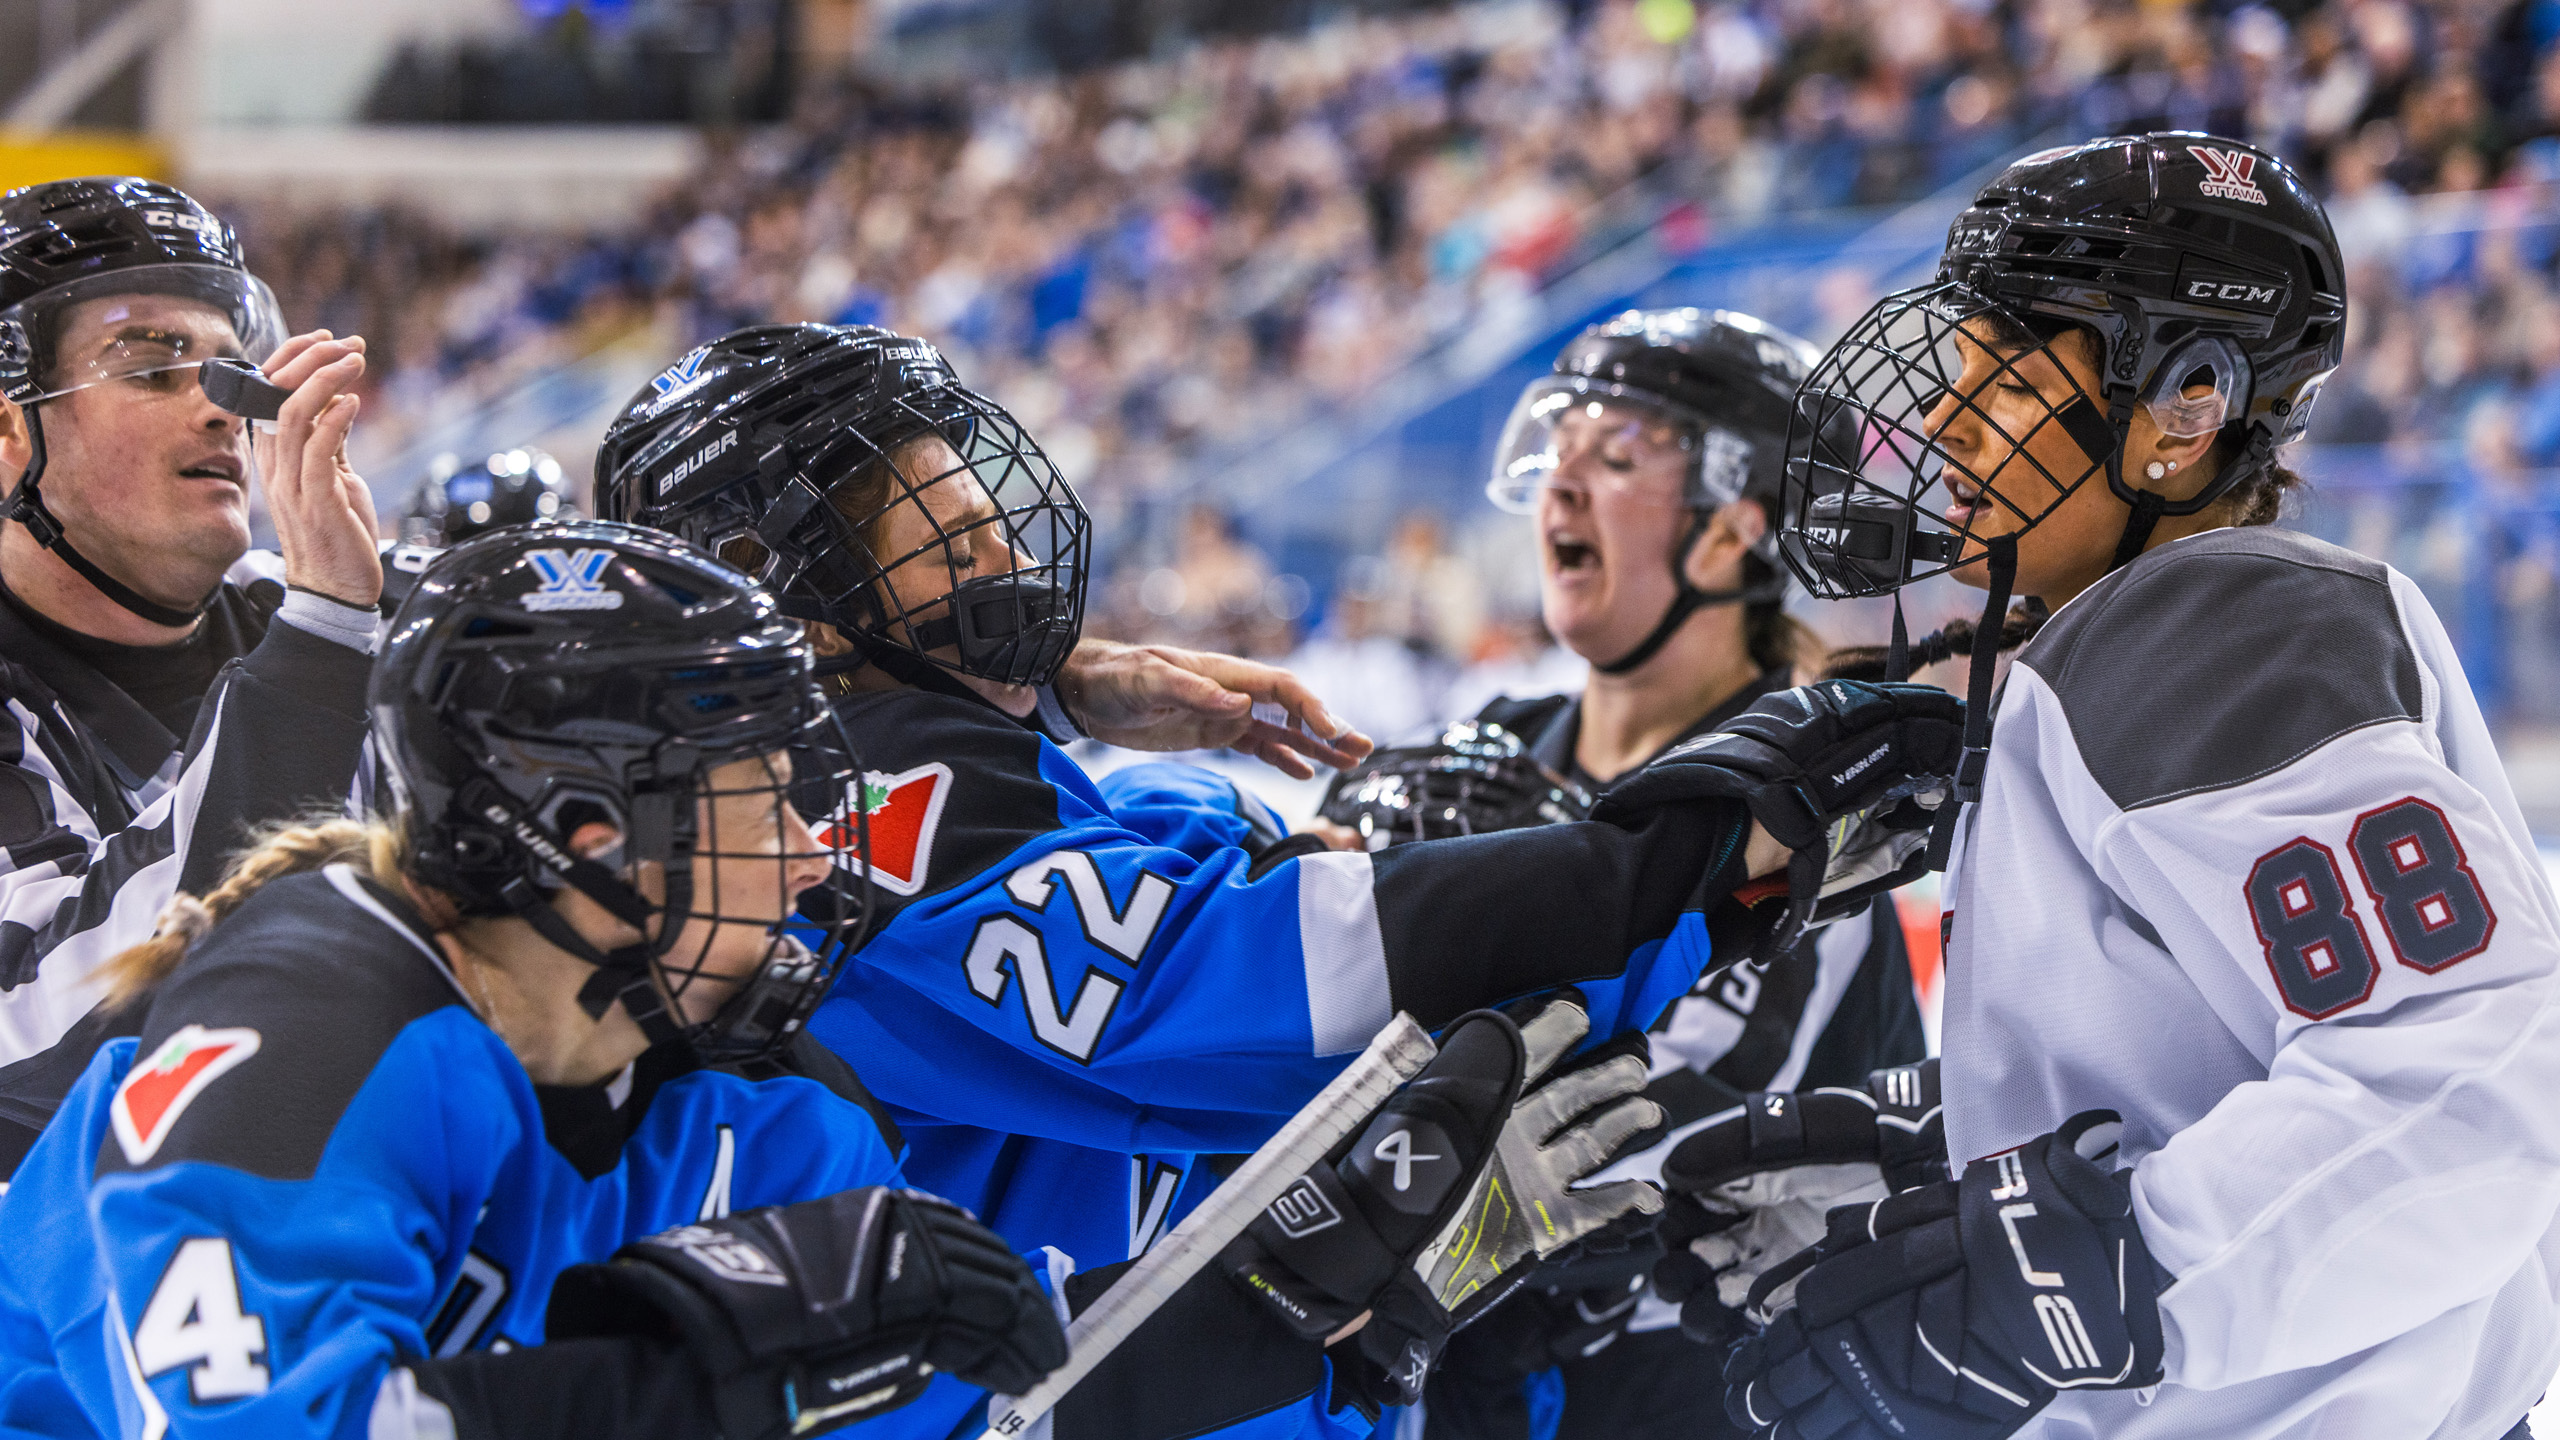 A fight breaks out between PWHL Toronto and PWHL Ottawa